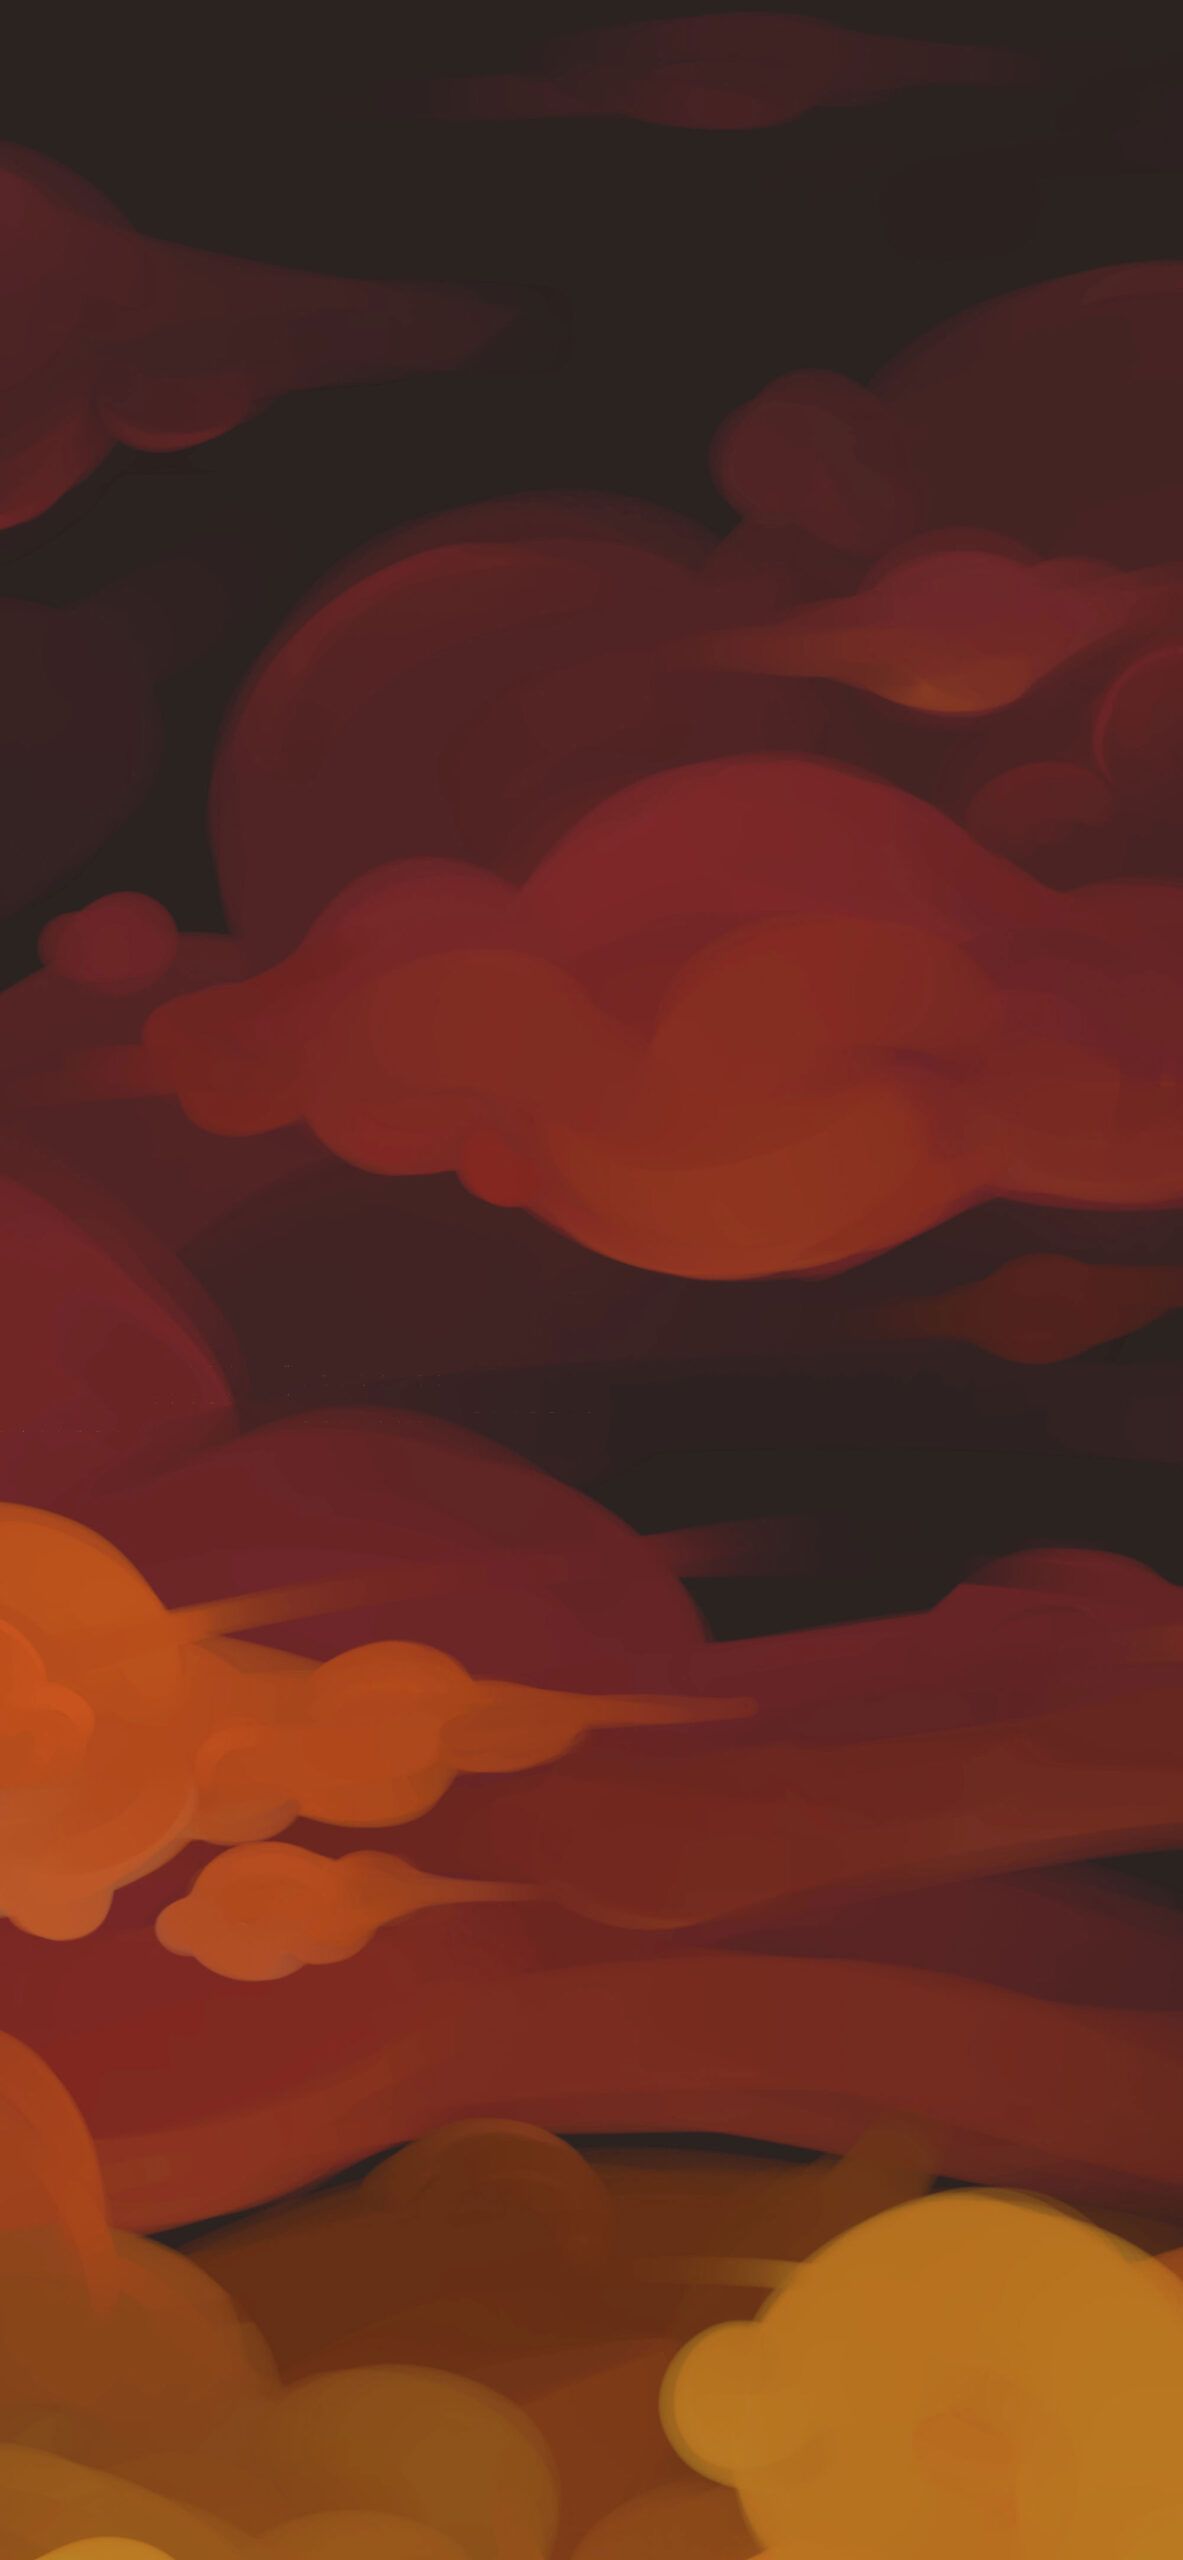 A painting of the sunset with clouds - Orange, dark orange